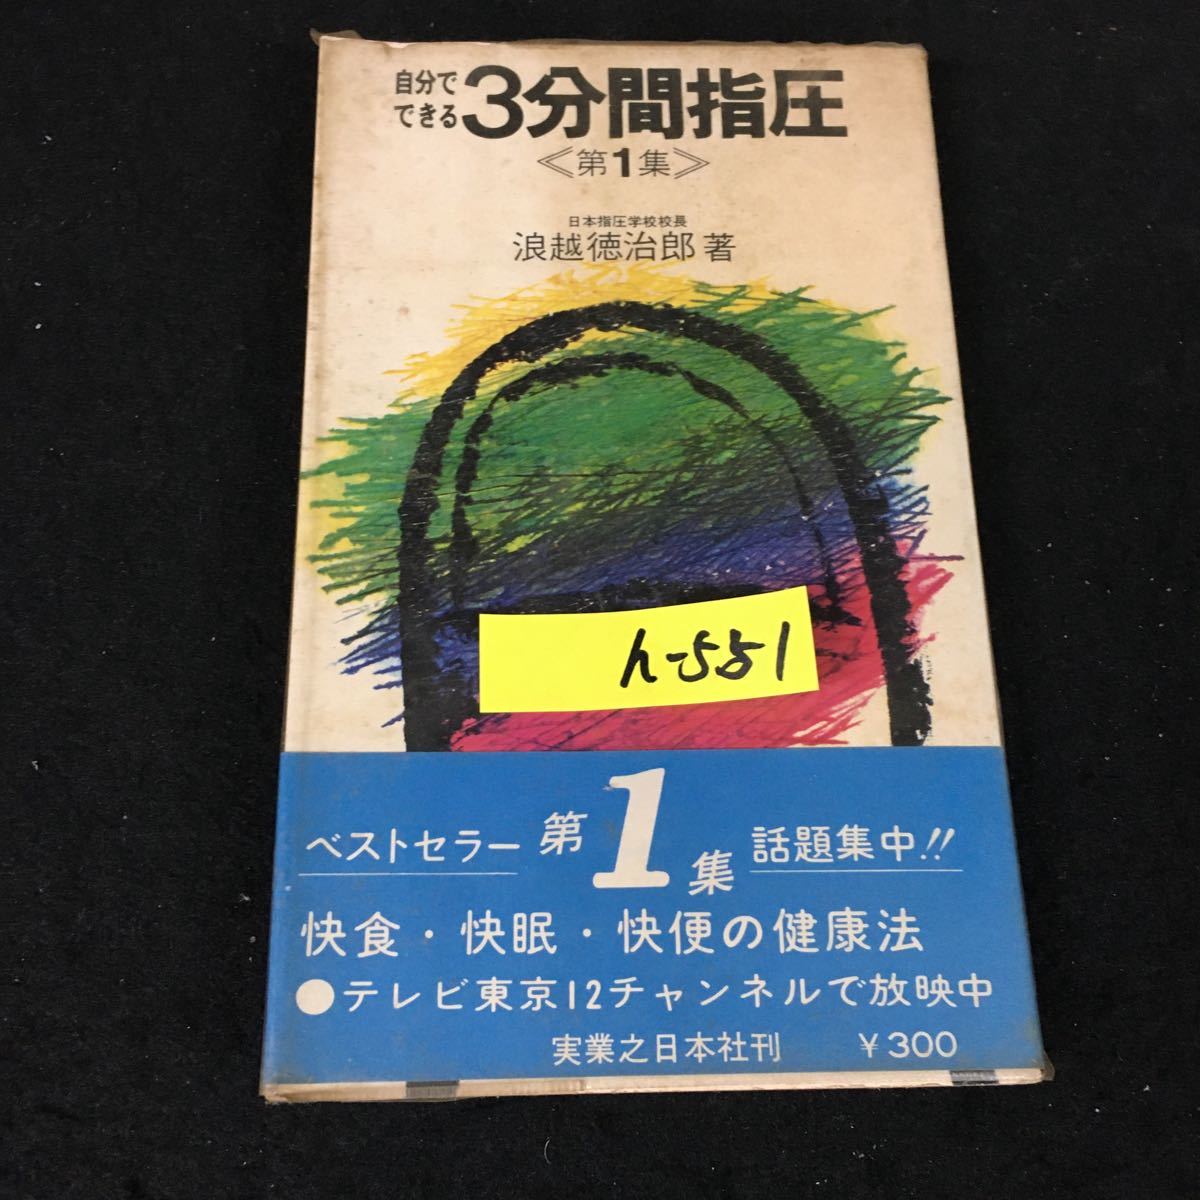 h-551 real day new book 64 oneself is possible 3 minute interval. shiatsu no. 1 compilation author /.. virtue .. corporation real industry . day head office Showa era 45 year no. 32 issue *12